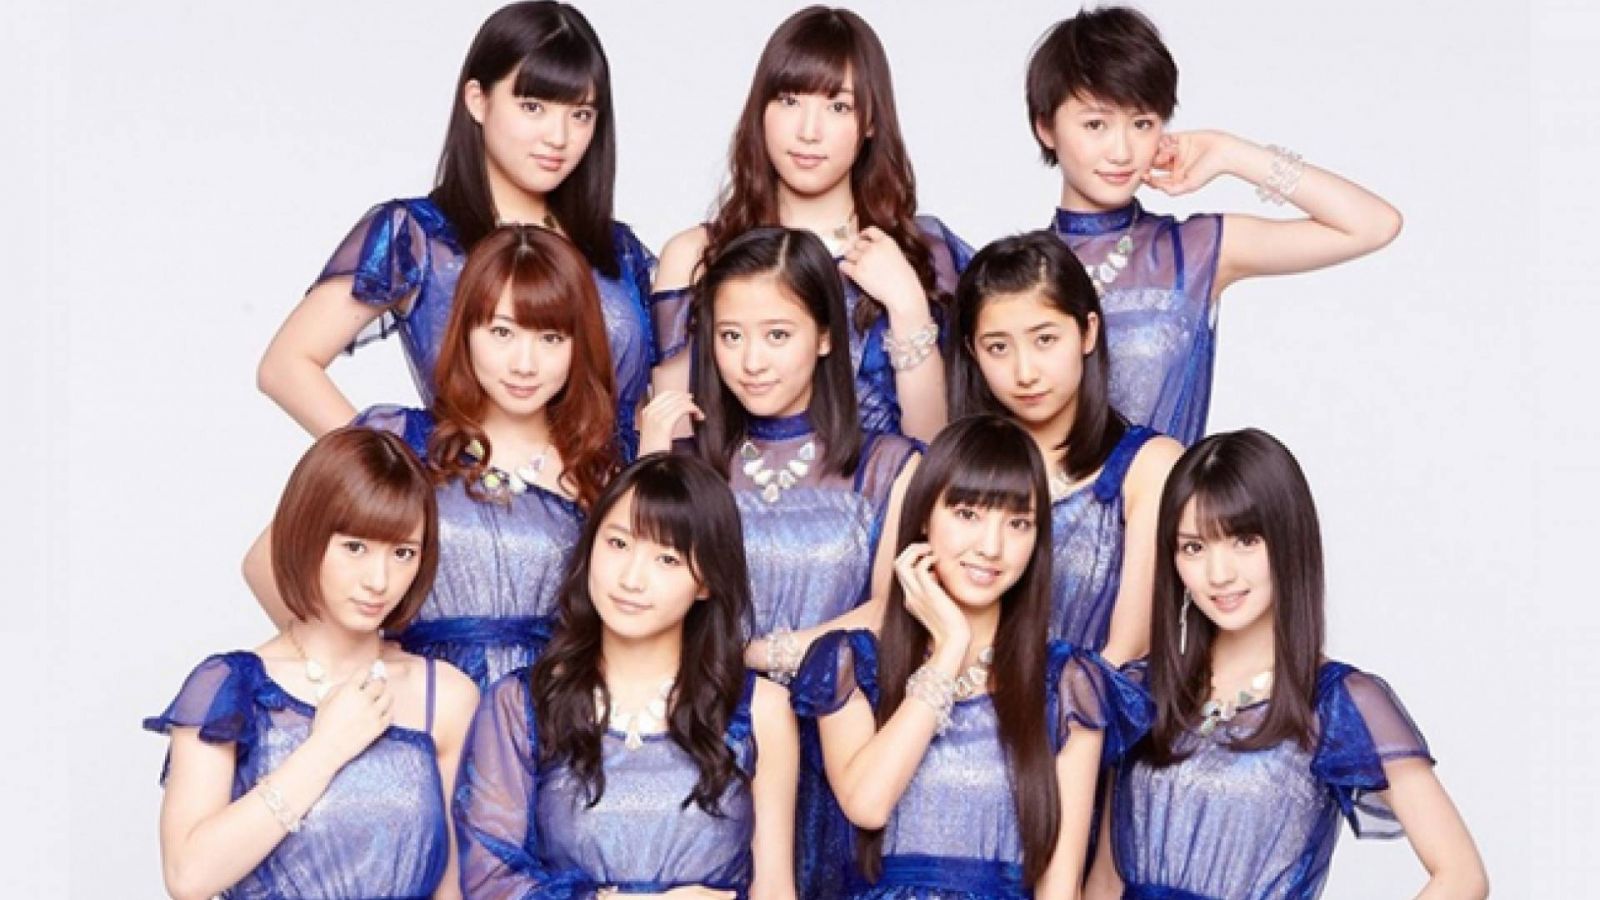 Morning Musume.'14 to Perform in New York © Morning Musume.'14 / DC FACTORY INC.